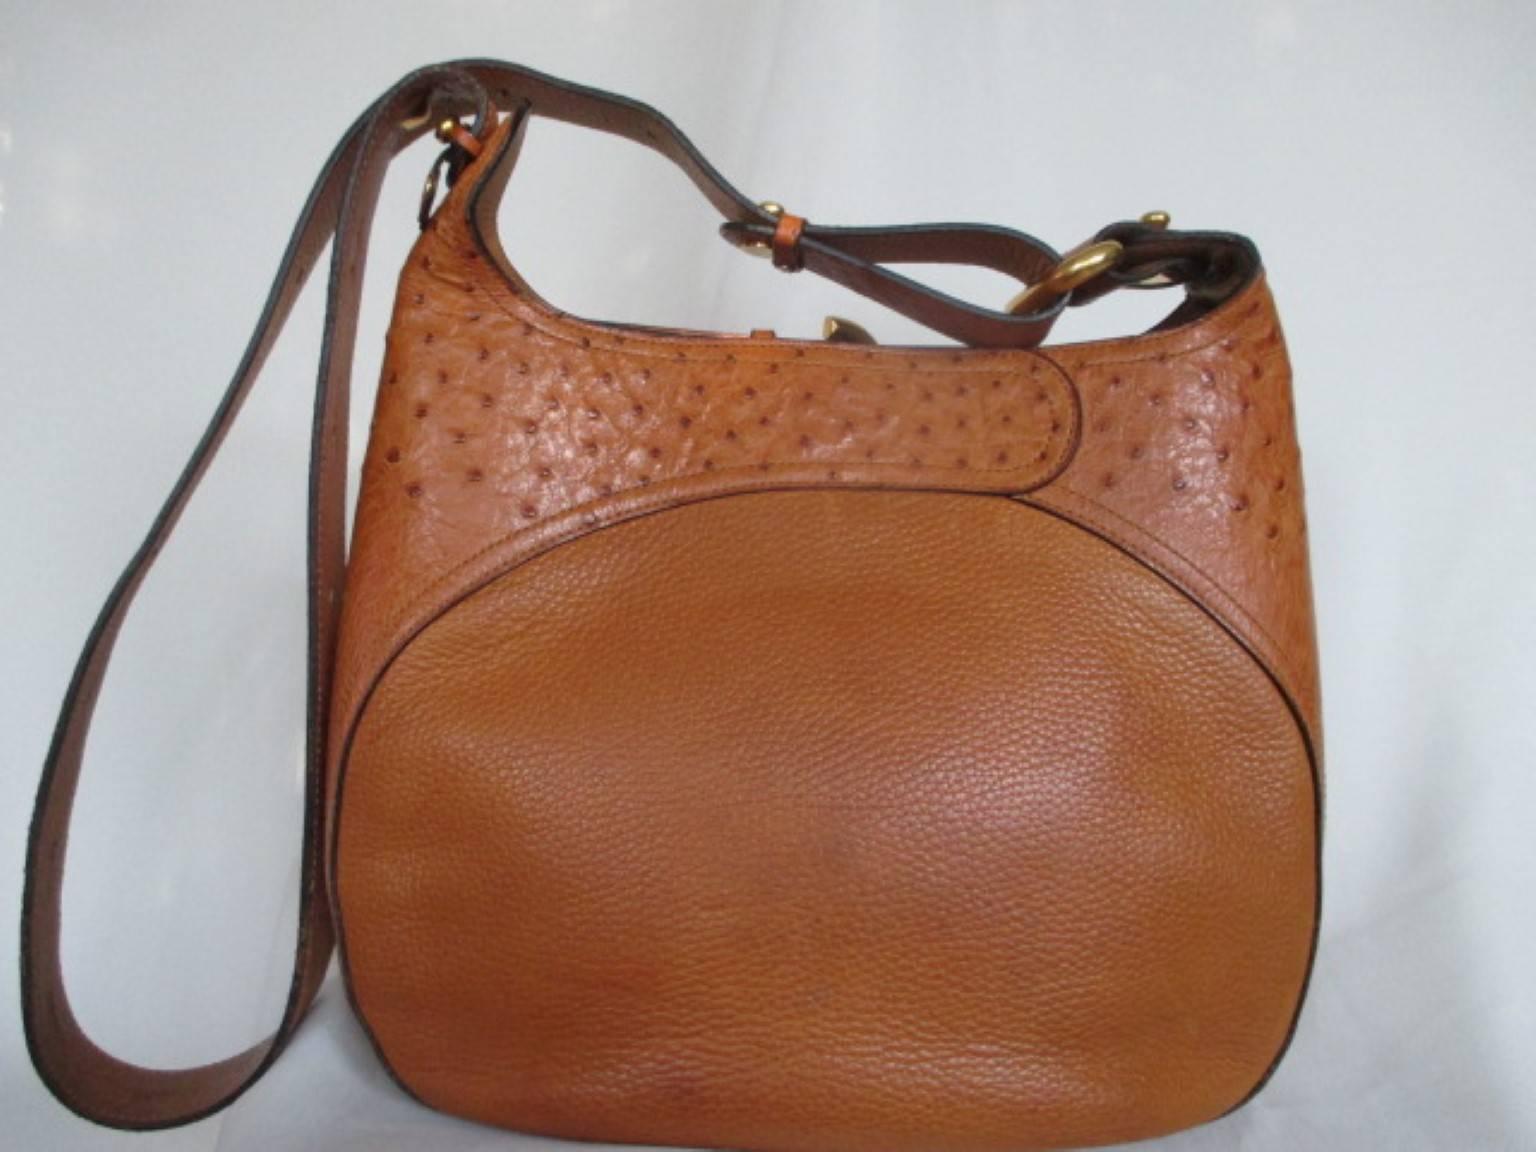 Rare vintage Delvaux ostrich/leather shoulder bag. 
Delvaux bags in ostrich leather are very rare, with a long waiting list as the bags are handmade in Belgium, Europe. 
This bag is made of crème/brown leather and ostrich with gold hardware, can be